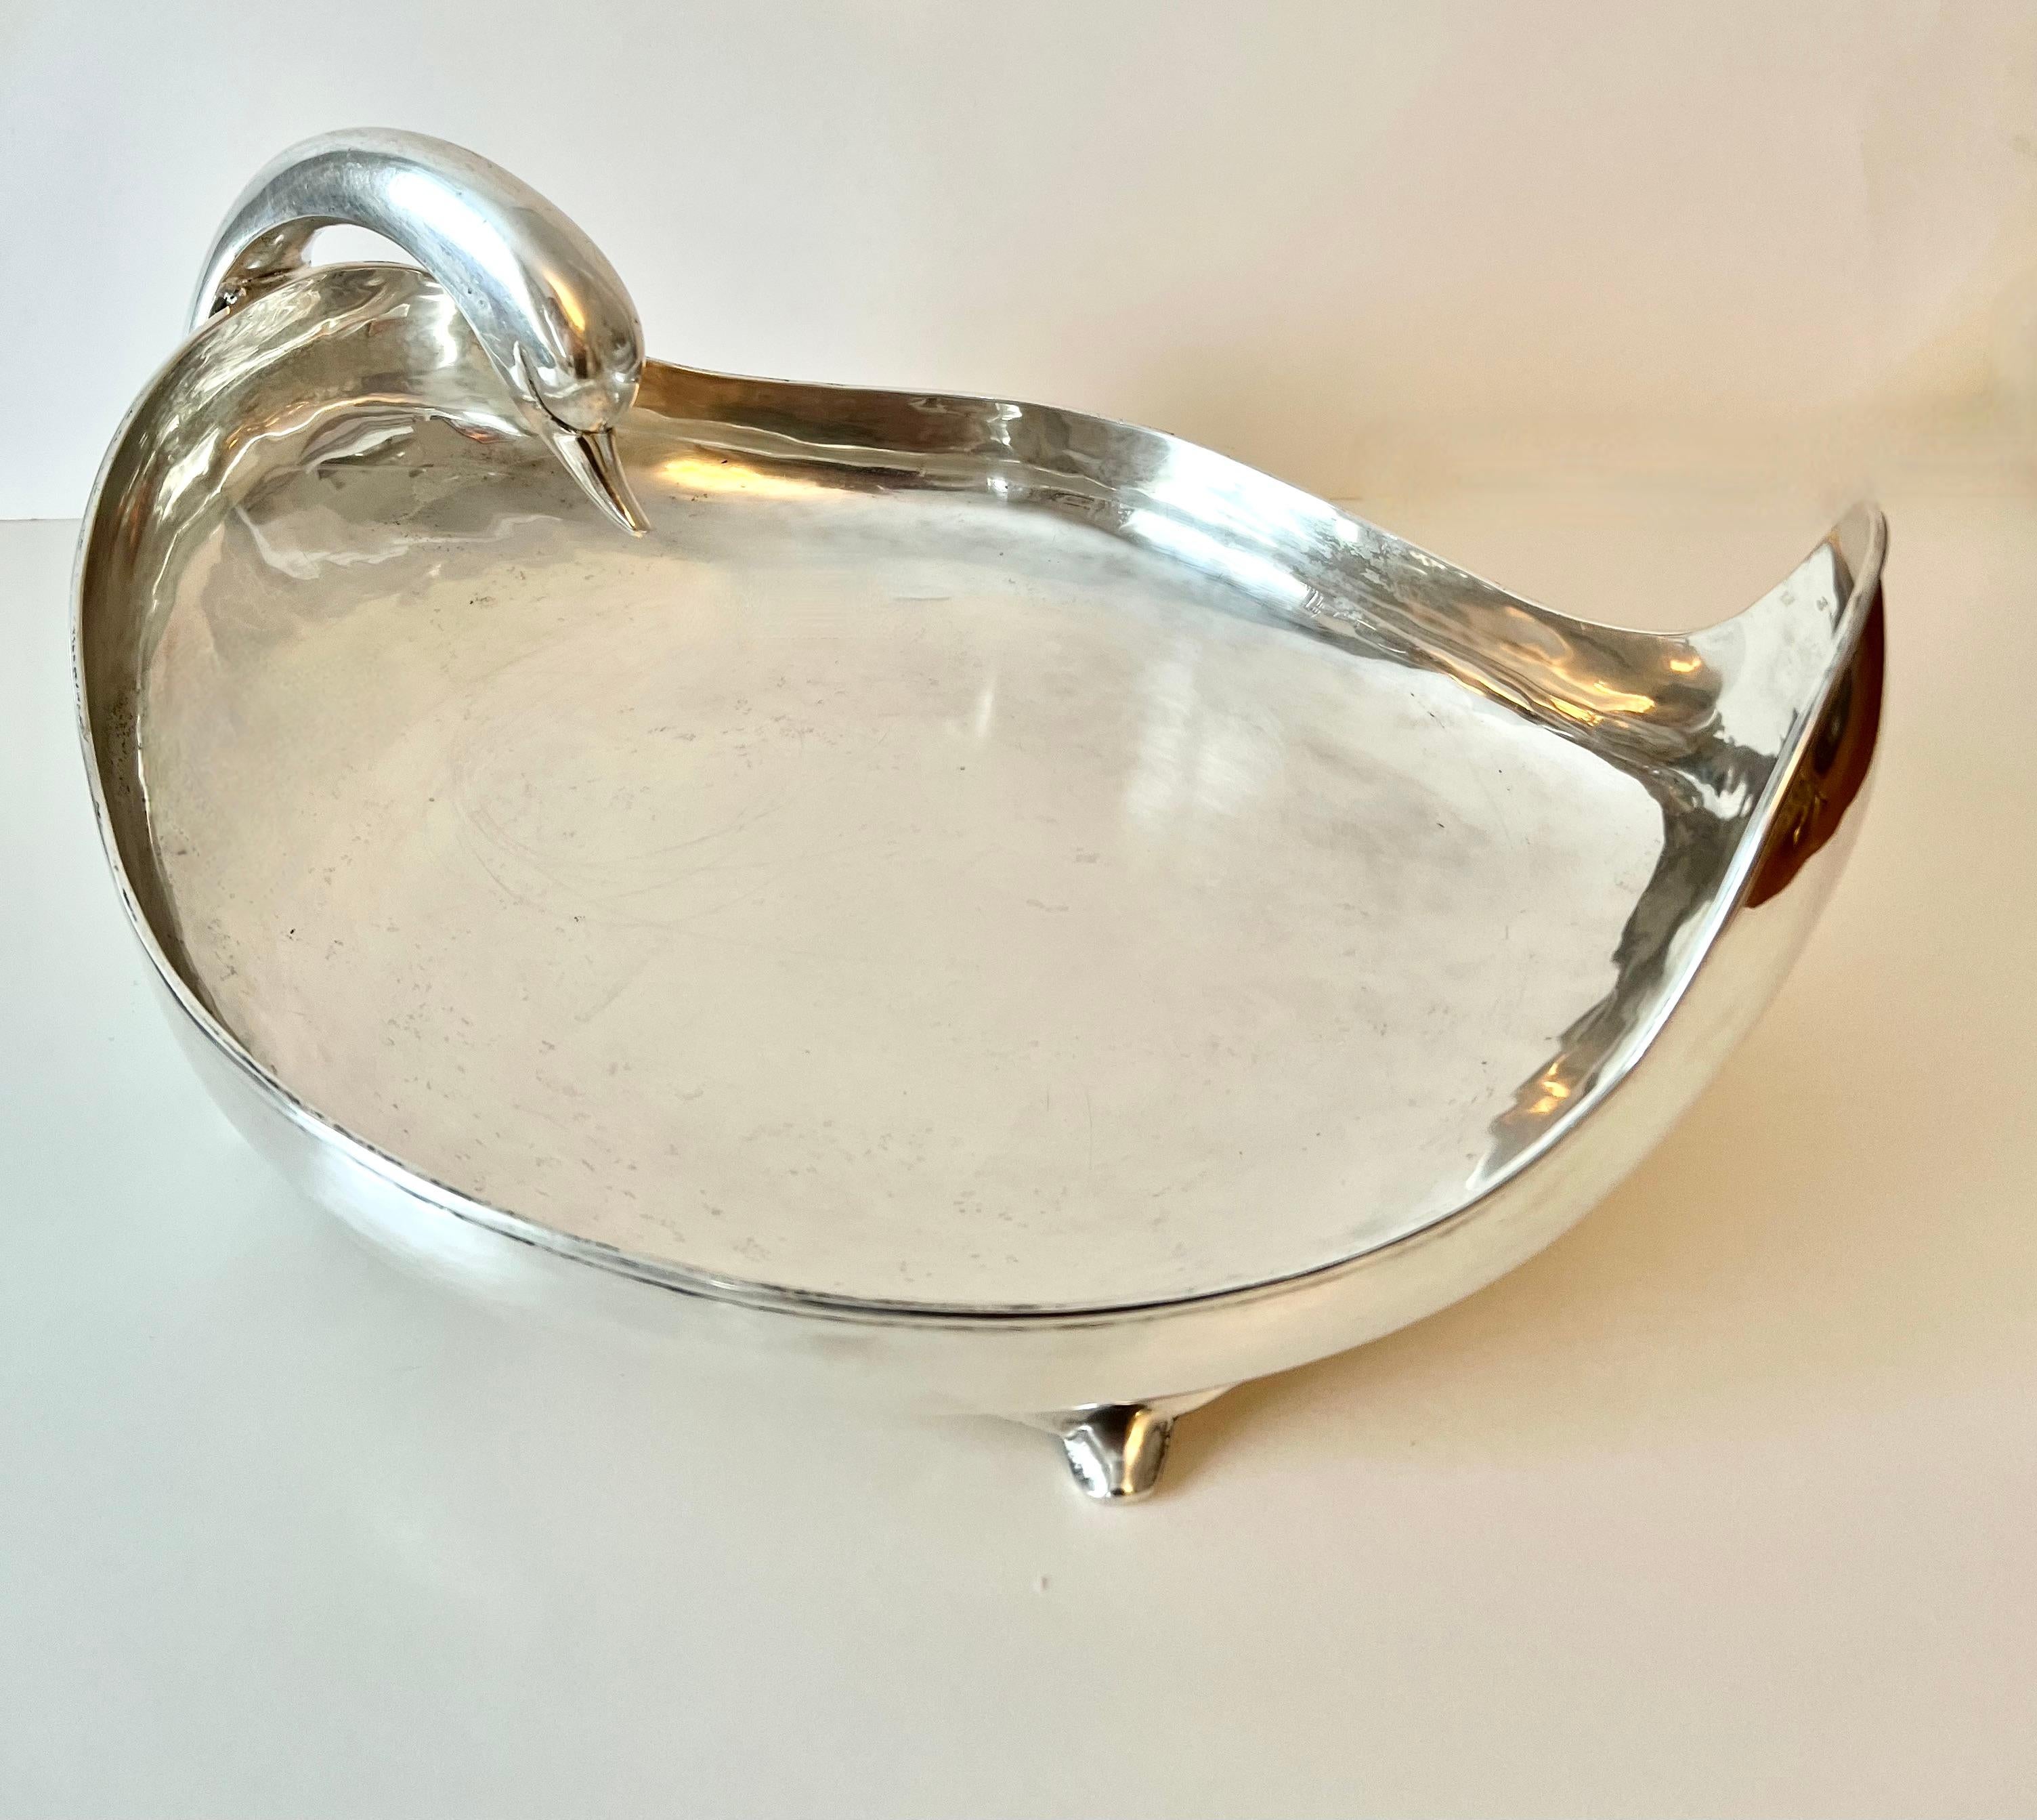 C. Zurita signed Mexican Sterling Silver Centerpiece or bowl in the shape of a swan, gracefully looking back over its body. A stunning piece made of 31.5 Ounces of Sterling, the shape and design are special.

A compliment to any cocktail table,